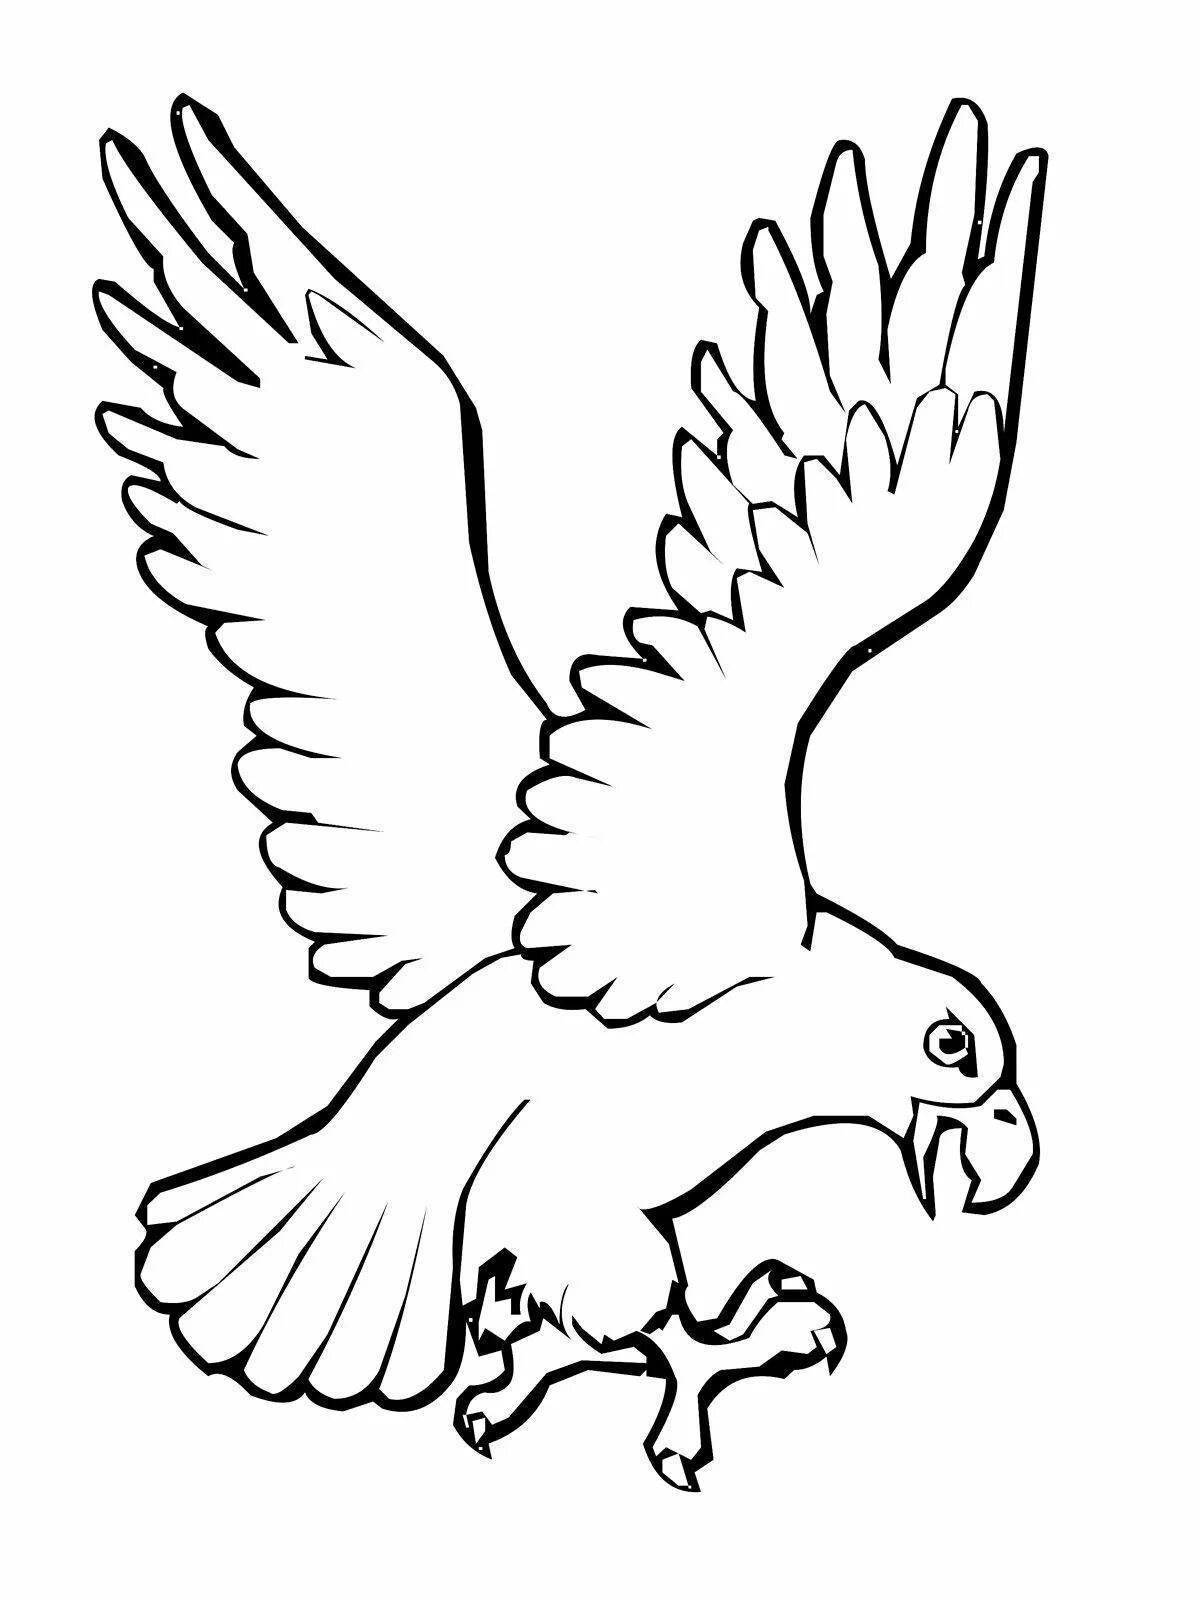 Coloring book dazzling eagle for kids